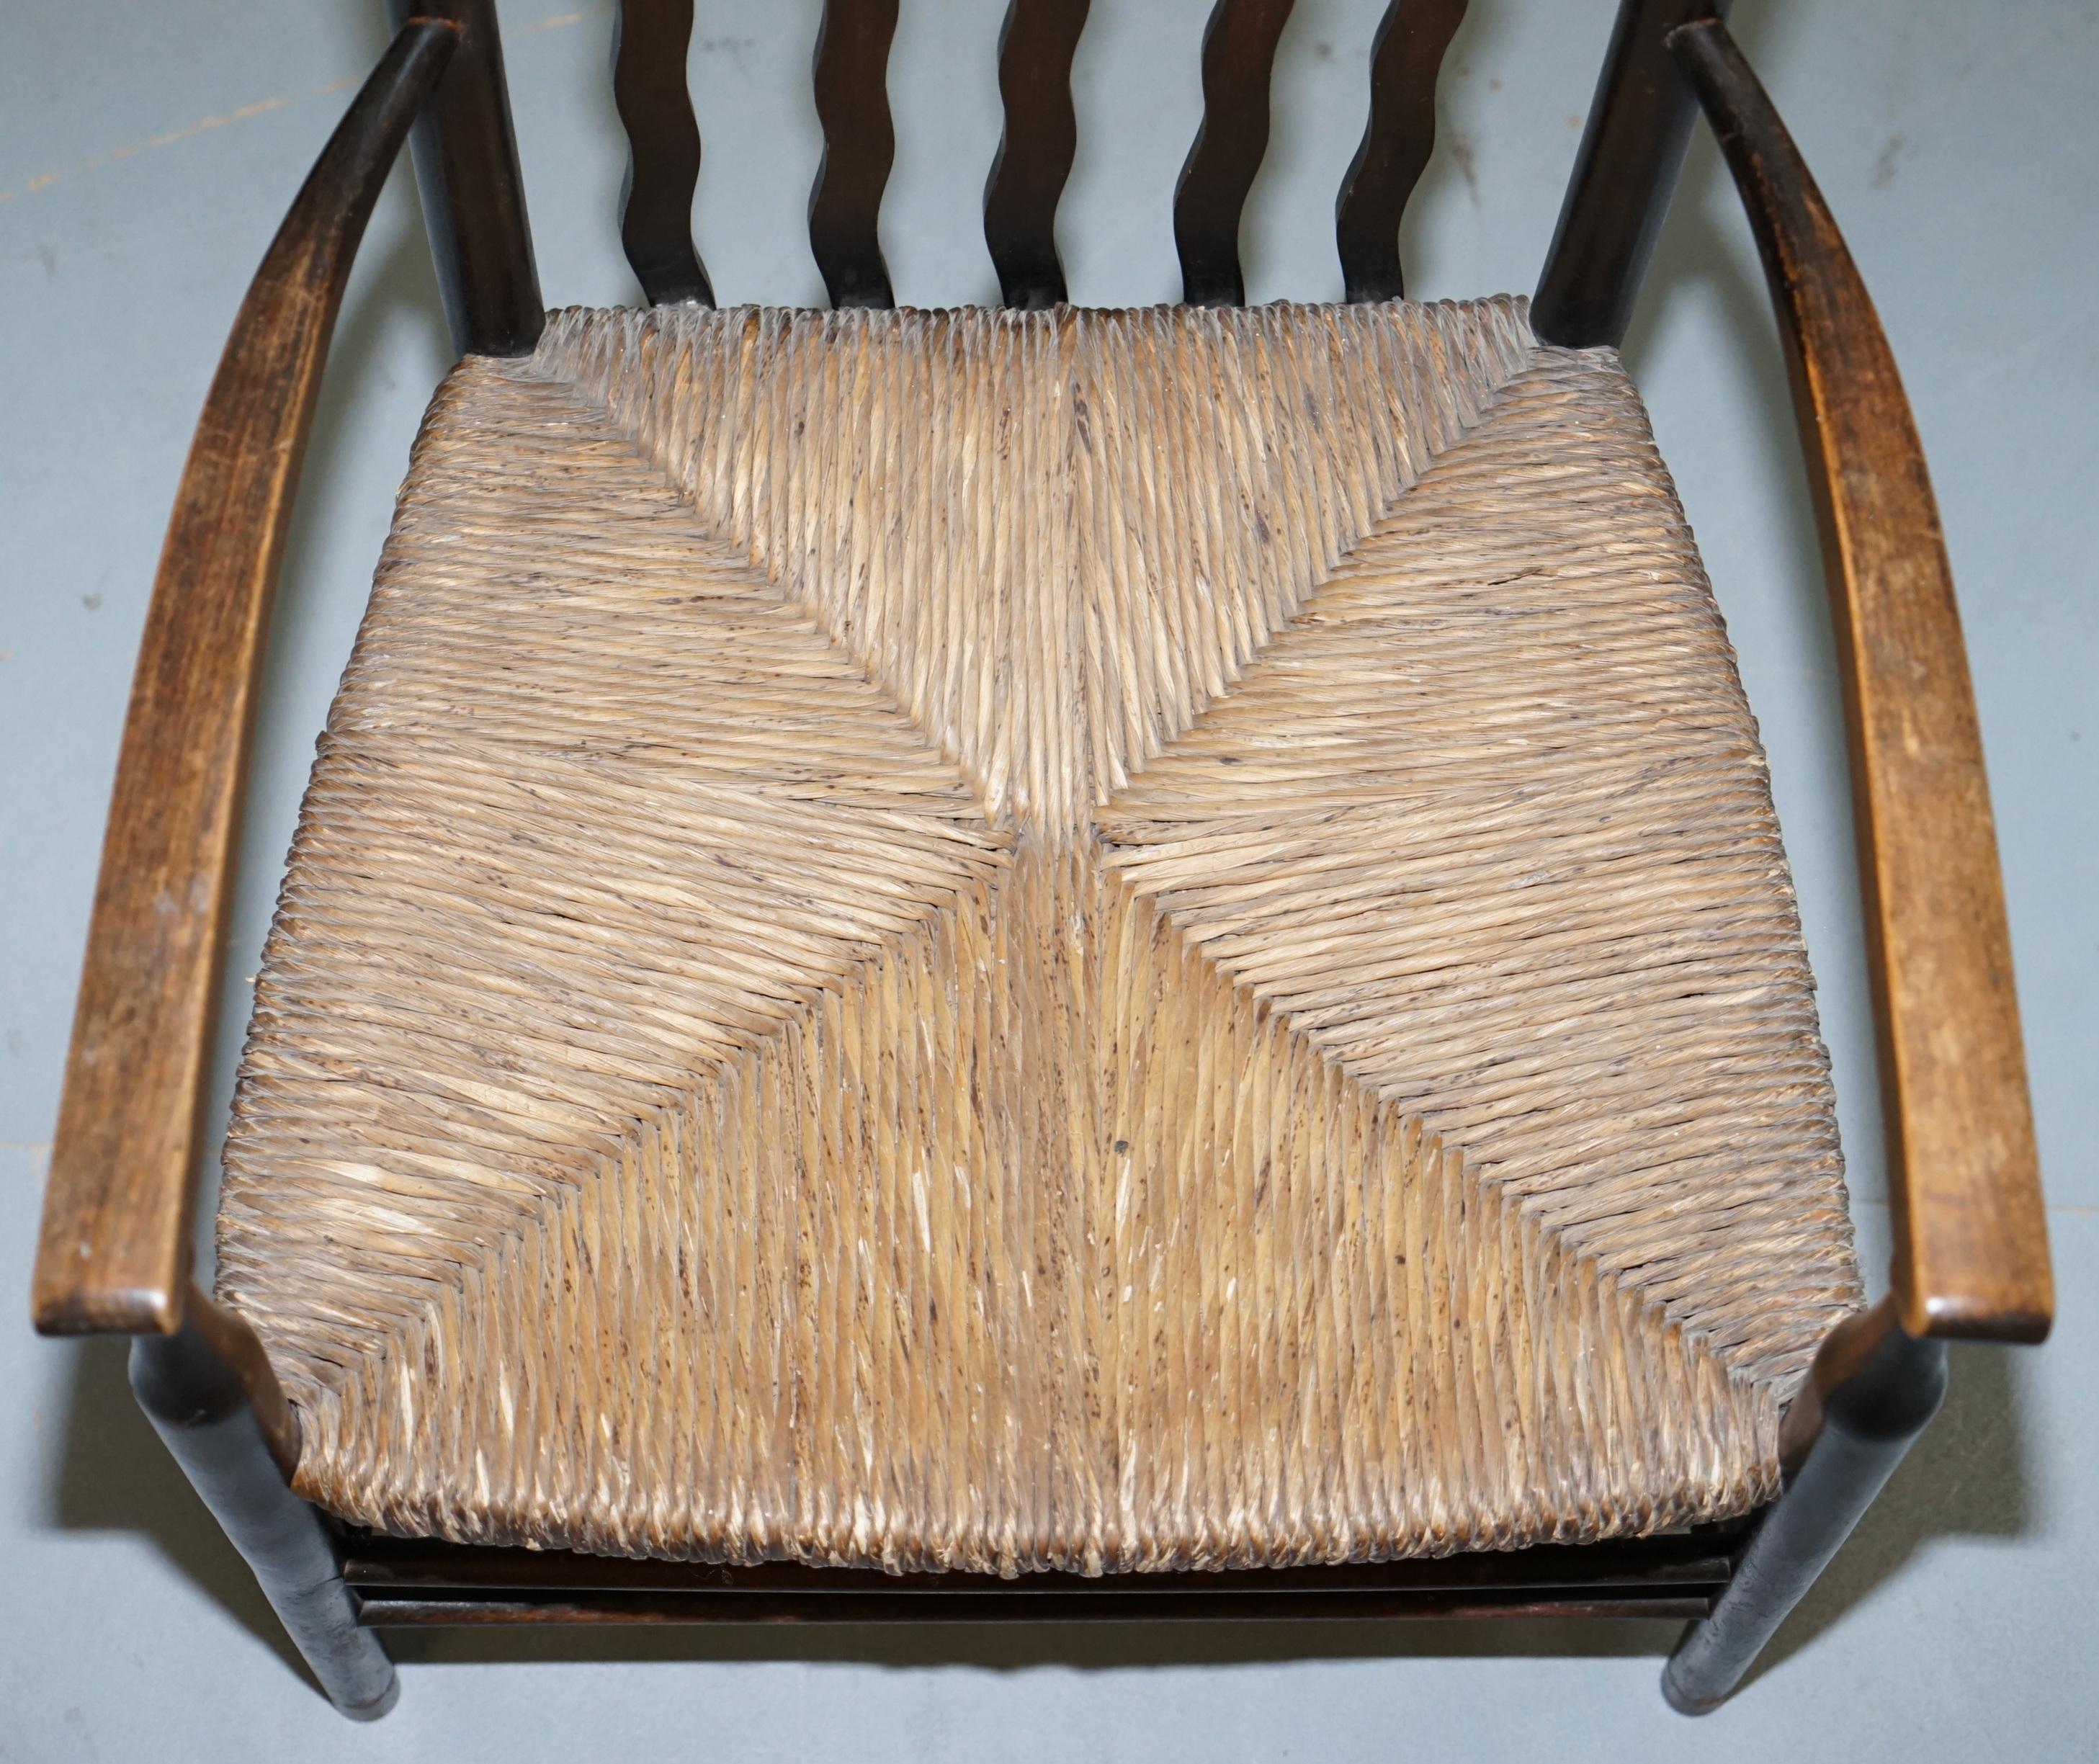 morris and co chair